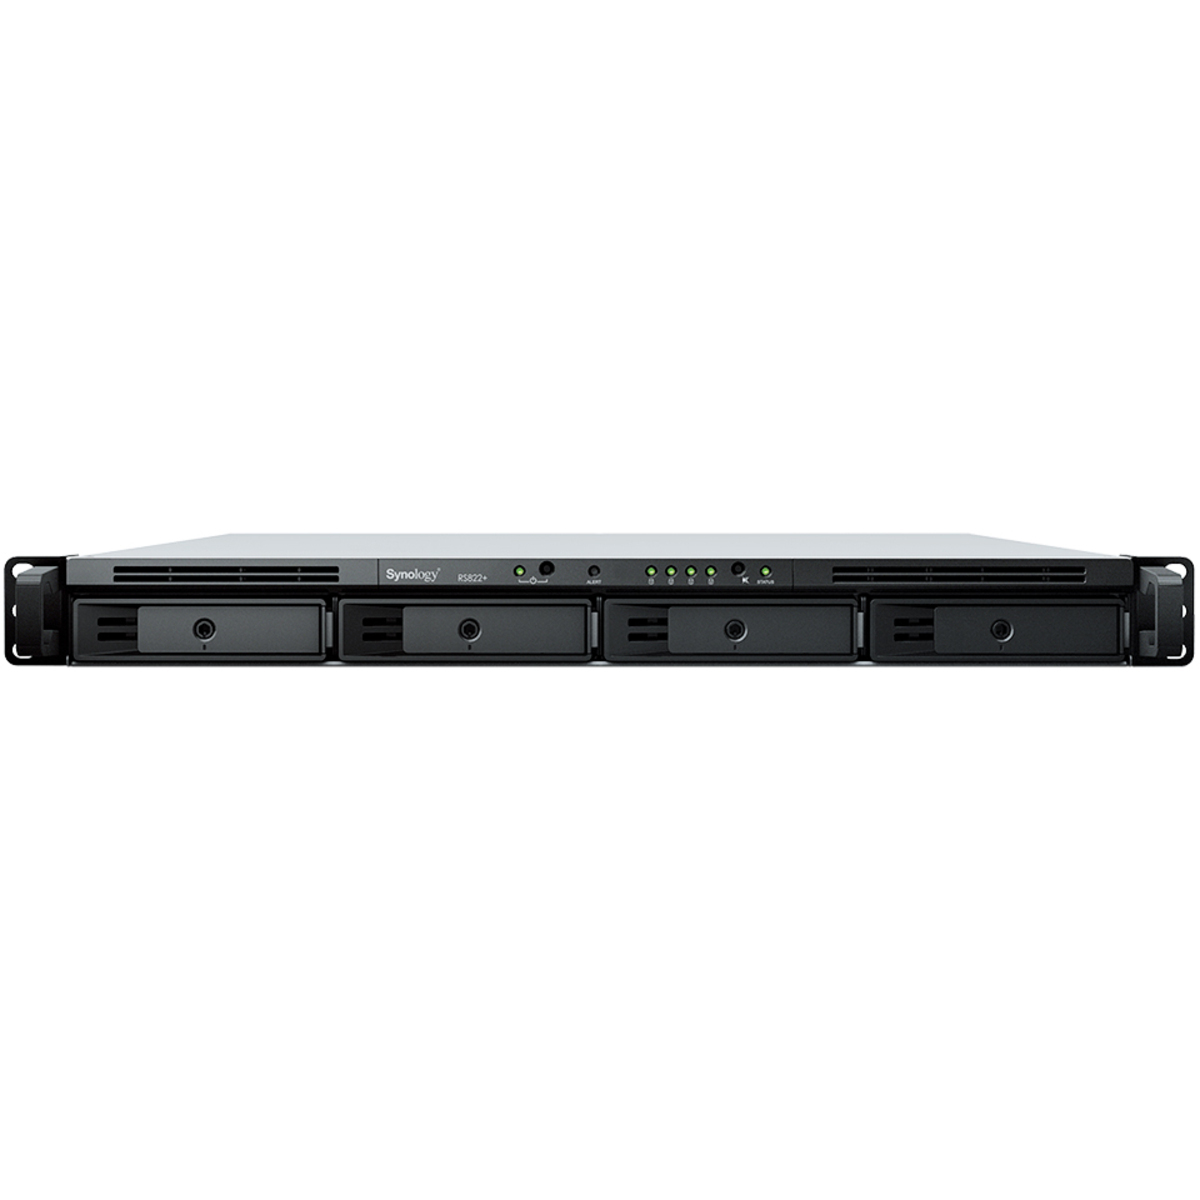 Synology RackStation RS822RP+ 32tb 4-Bay RackMount Multimedia / Power User / Business NAS - Network Attached Storage Device 4x8tb Seagate IronWolf Pro ST8000NT001 3.5 7200rpm SATA 6Gb/s HDD NAS Class Drives Installed - Burn-In Tested - ON SALE - FREE RAM UPGRADE RackStation RS822RP+